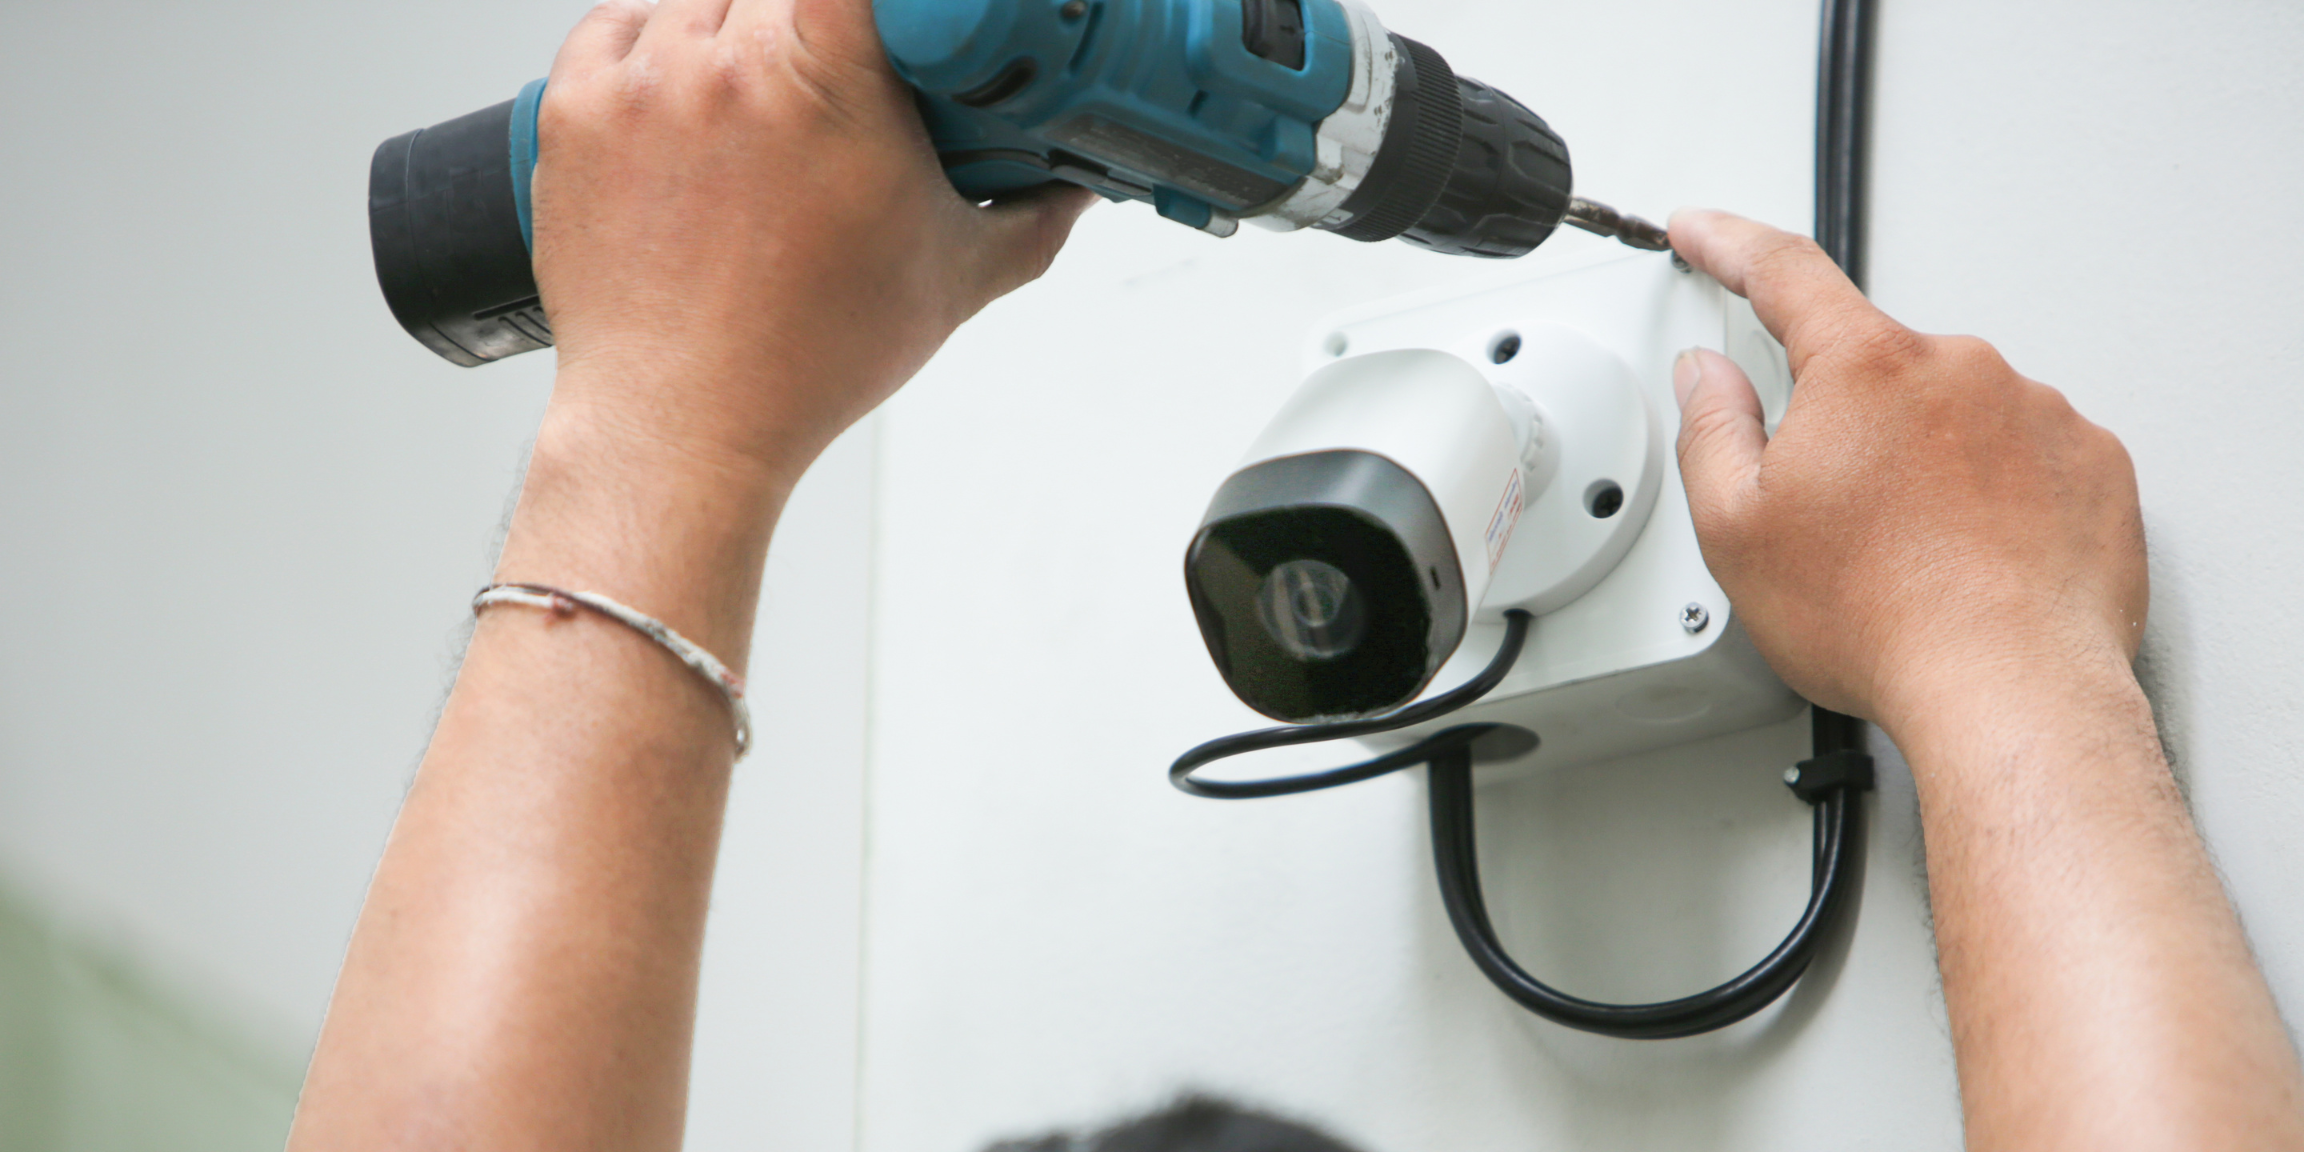 A person installing a security camera